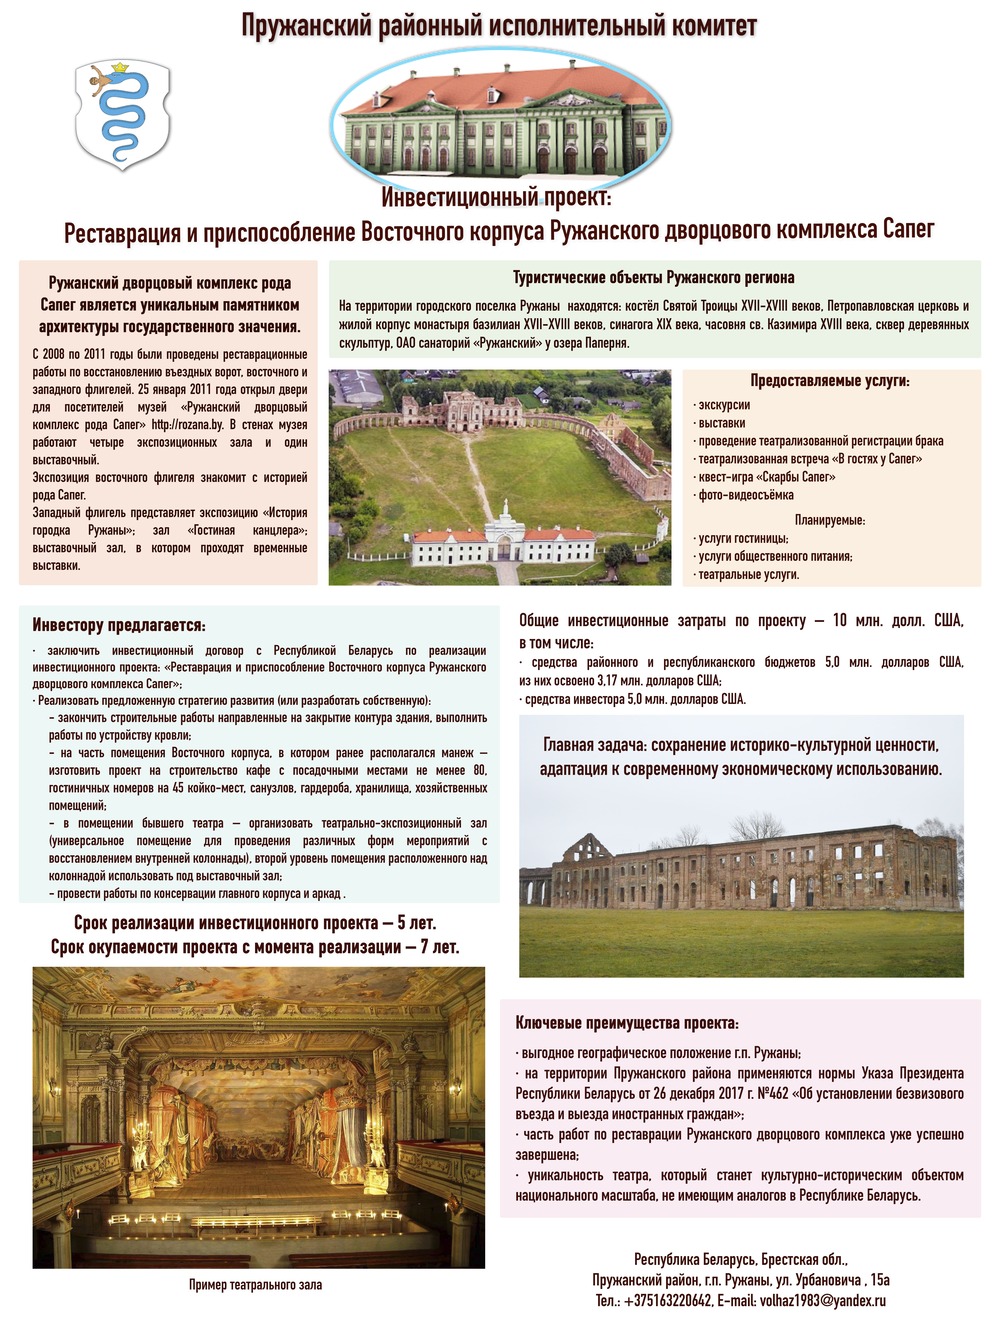 Restoration and adaptation of the Eastern building of the palace complex of the Sapieha in Ruzhany_3